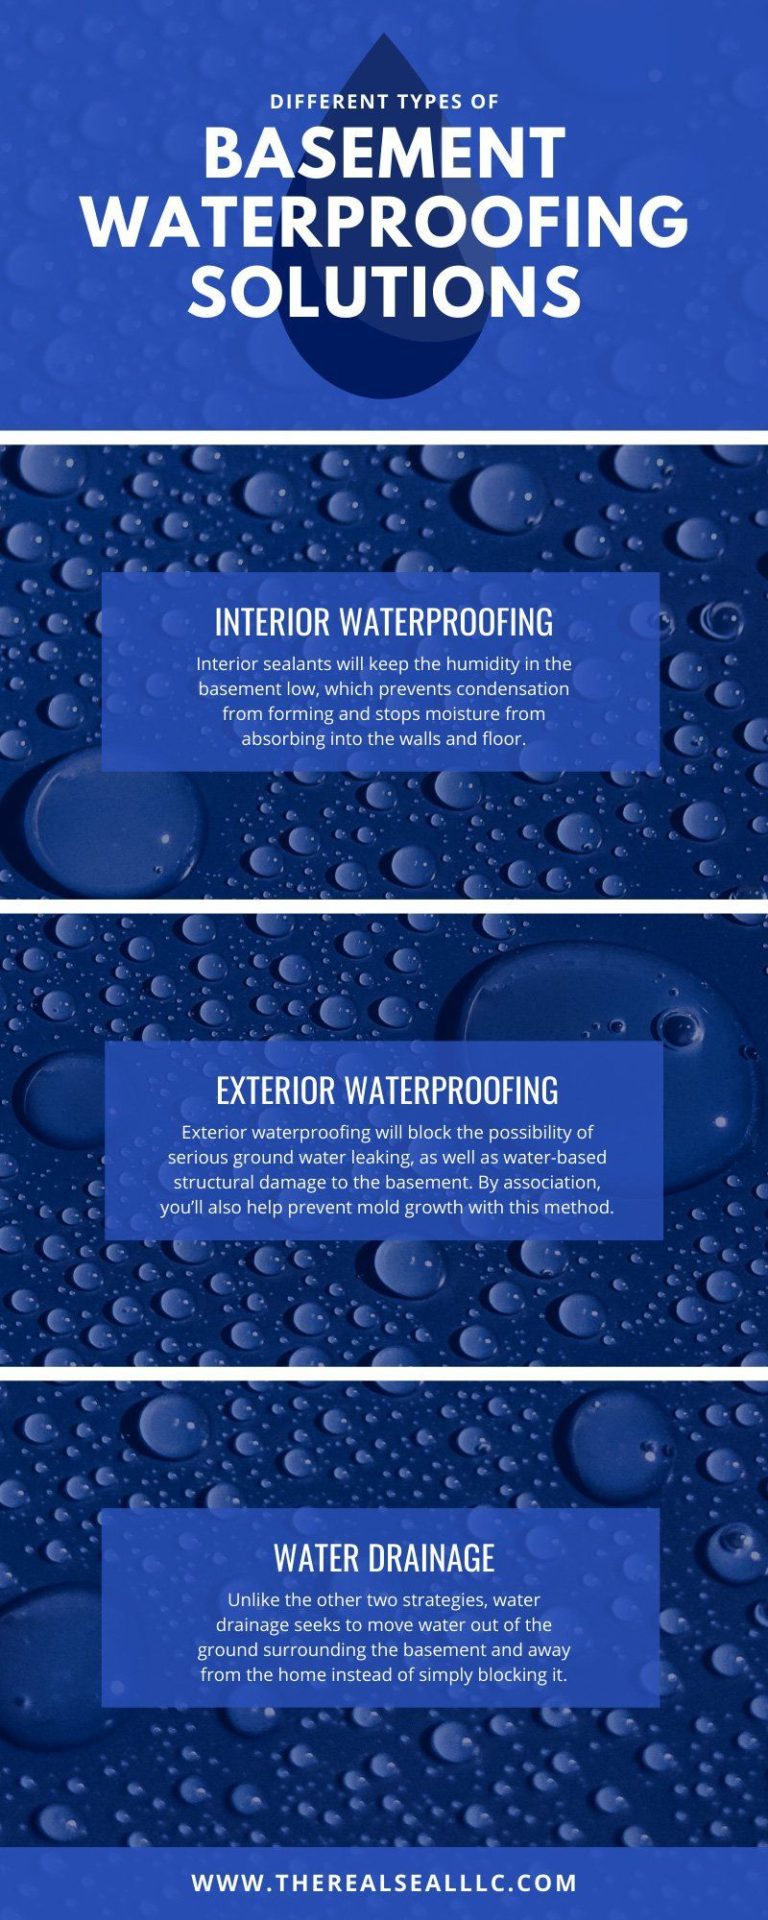 Different Types of Basement Waterproofing Solutions